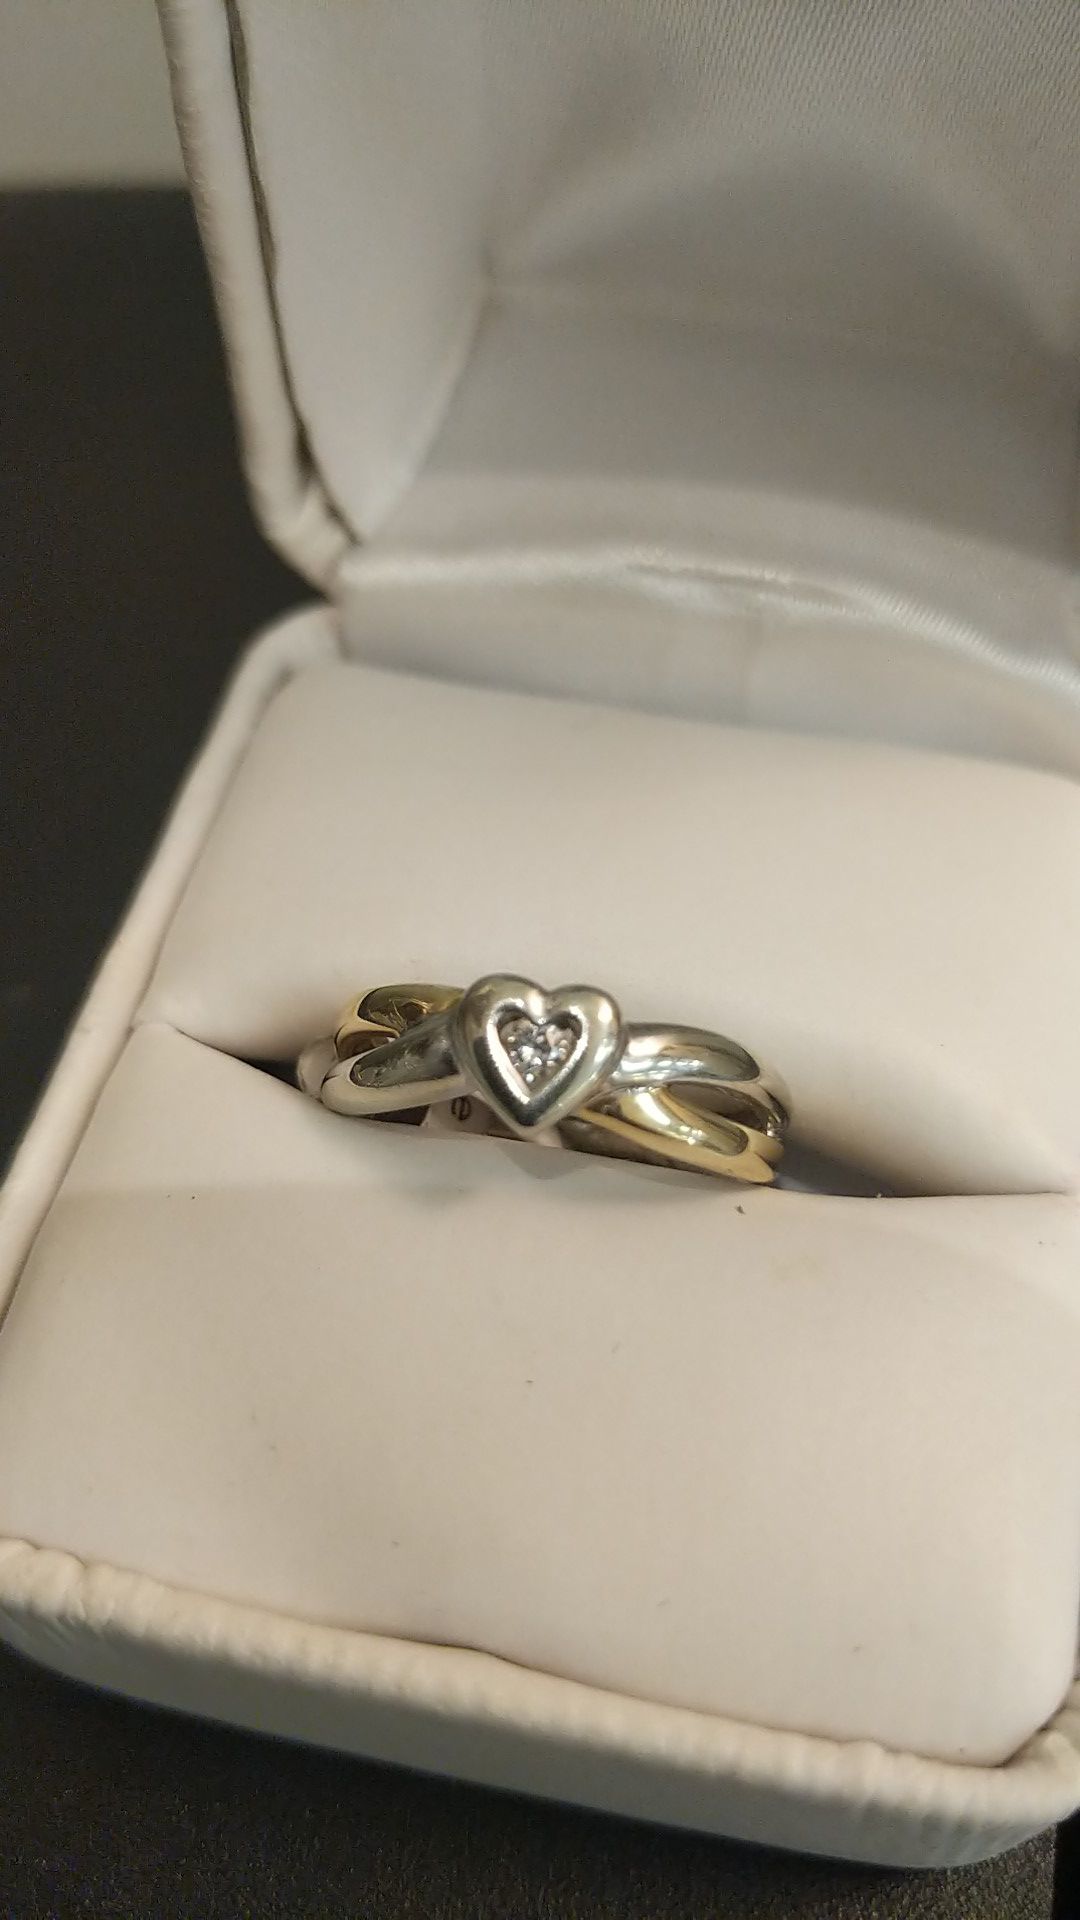 TWO TONED SOLID GOLD DIAMOND HEART RING